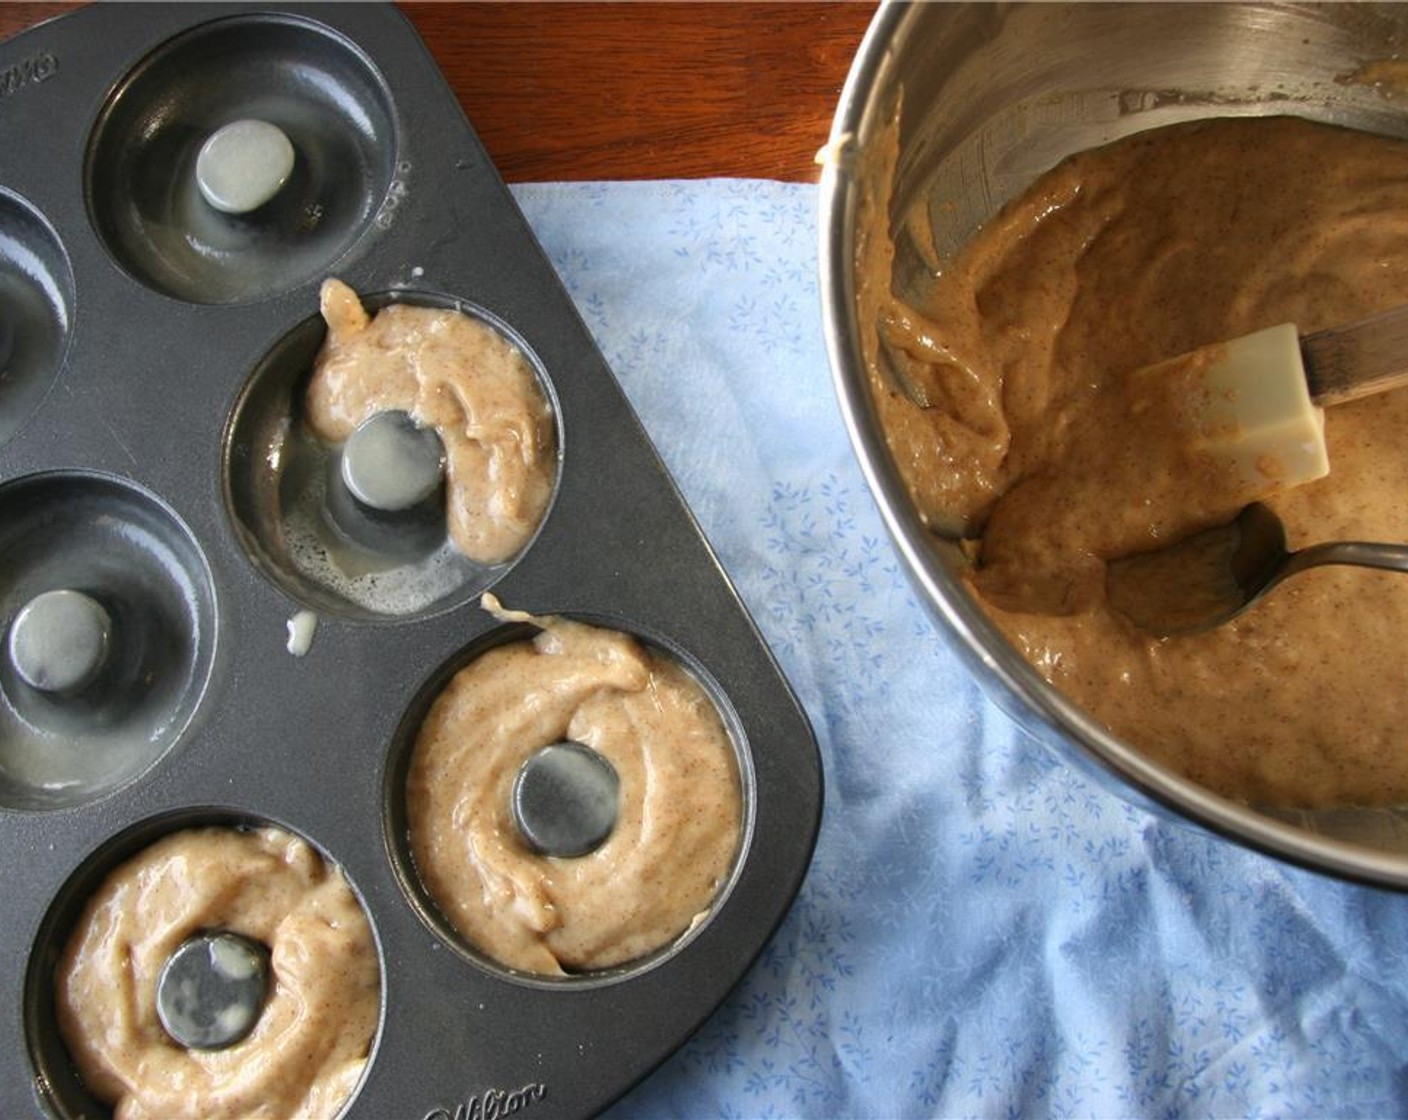 step 4 Spoon batter into greased doughnut pan about 3/4 full. Bake for 12 minutes. Place on wire rack to cool completely.